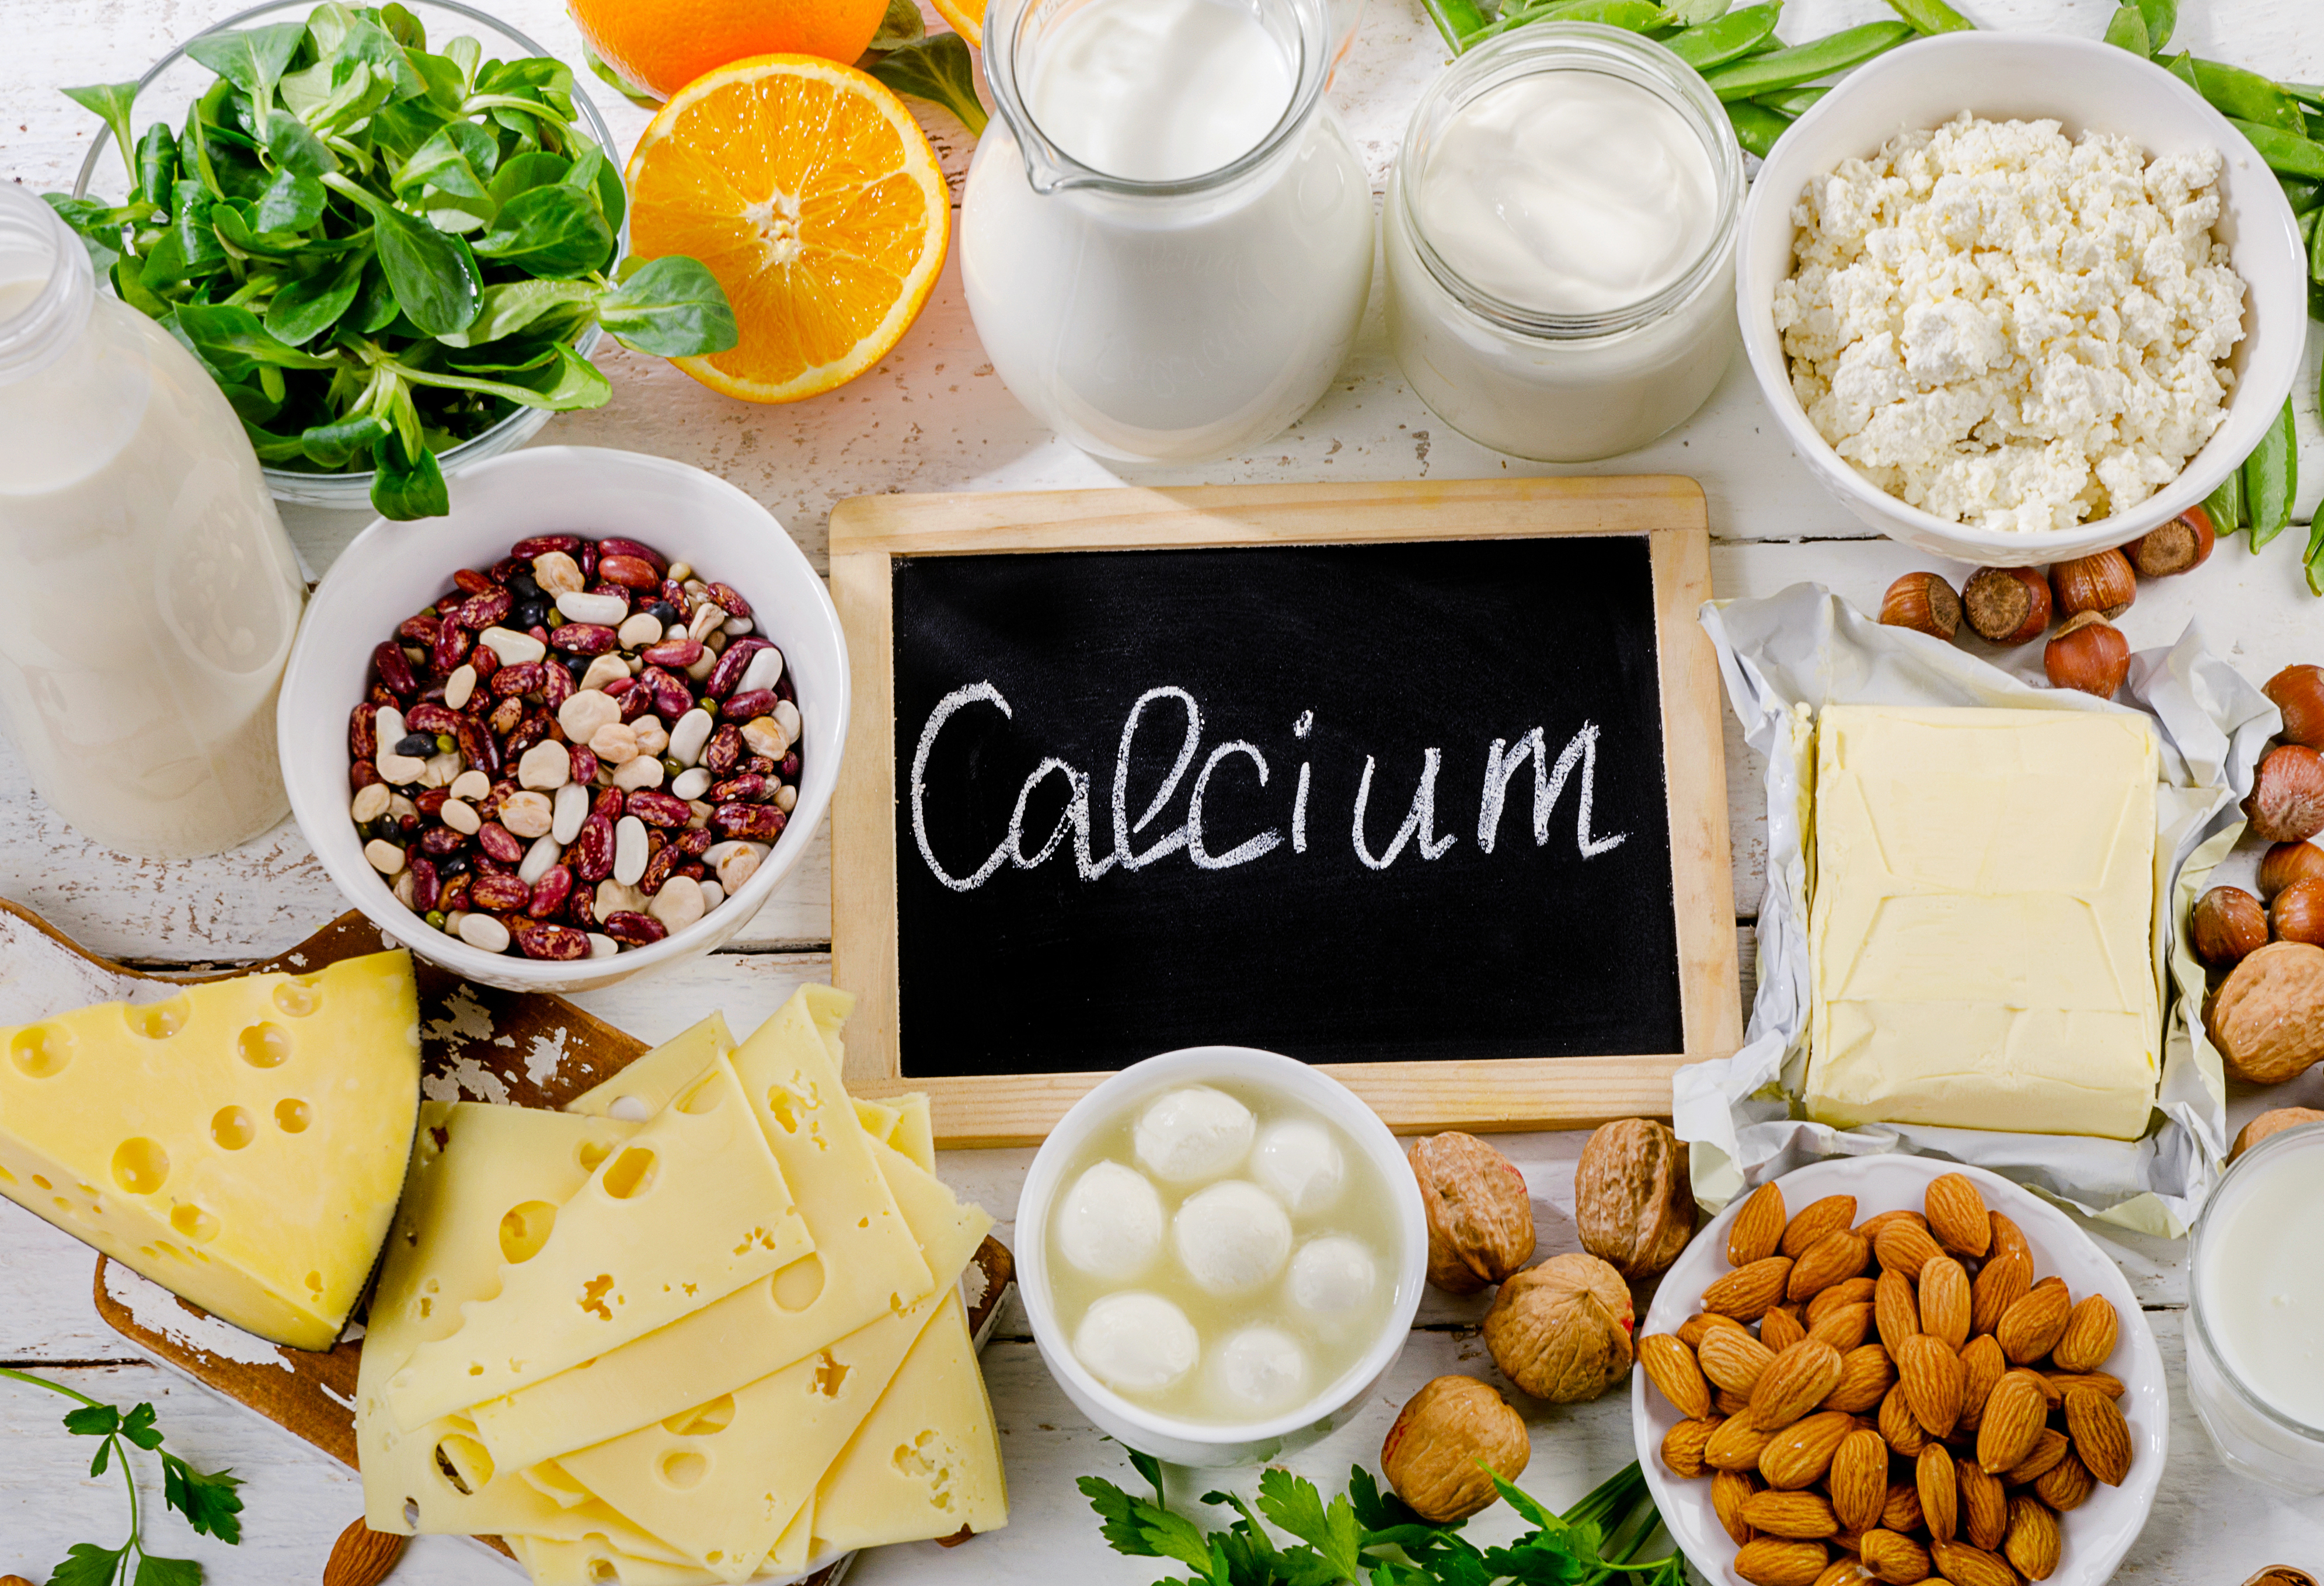 Calcium is found in foods like dairy, nuts and dark, leafy greens.